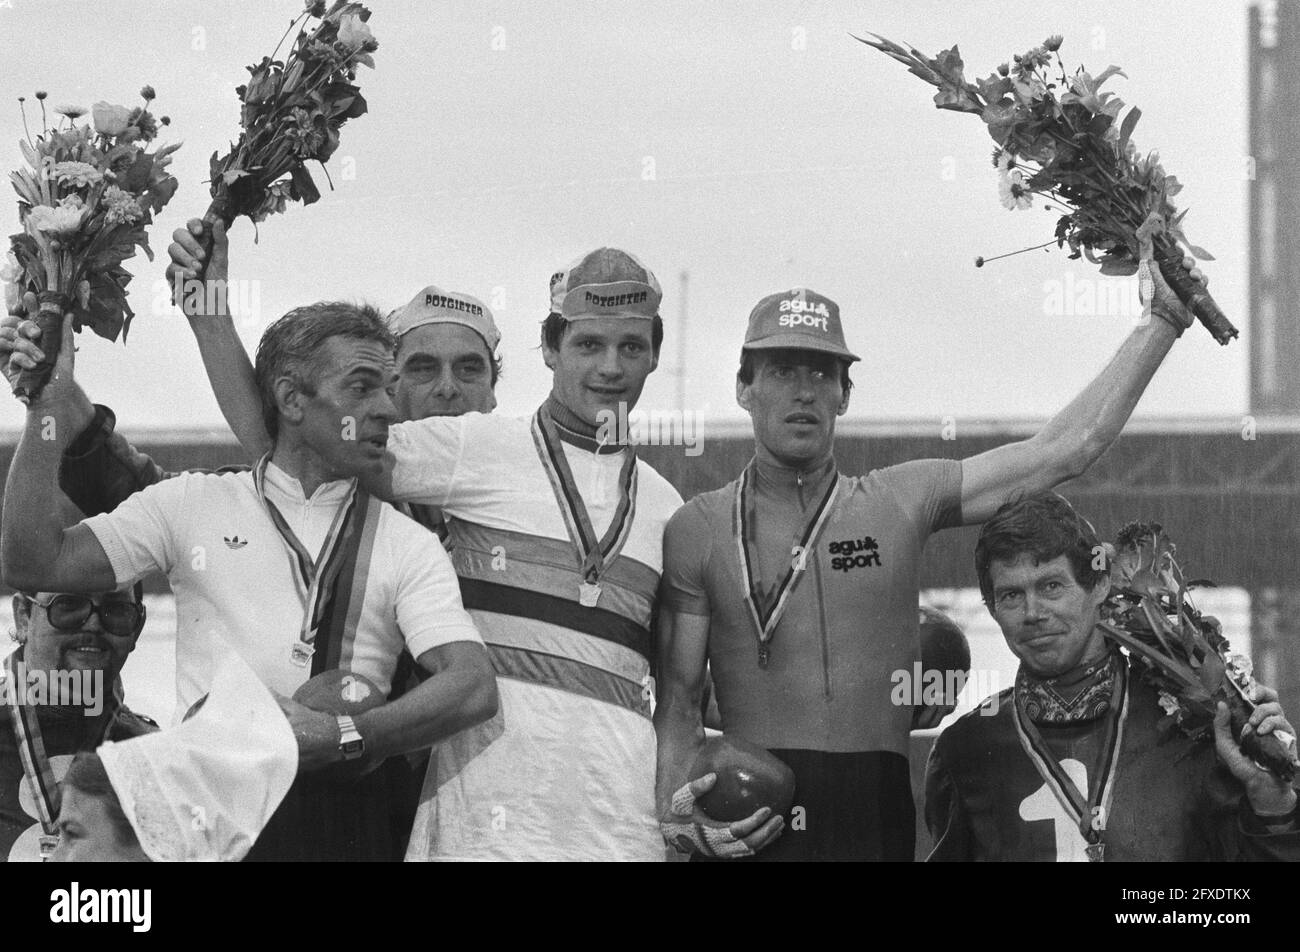 Staying for pros; during the homage from left to right Wilfried Peffgen (2nd), half visible Noppie Koch, Martin Venix (1st), Cees Stam (3rd) and pacer Bruno Walraven, September 2, 1979, homage, sports, bicycle racing, The Netherlands, 20th century press agency photo, news to remember, documentary, historic photography 1945-1990, visual stories, human history of the Twentieth Century, capturing moments in time Stock Photo